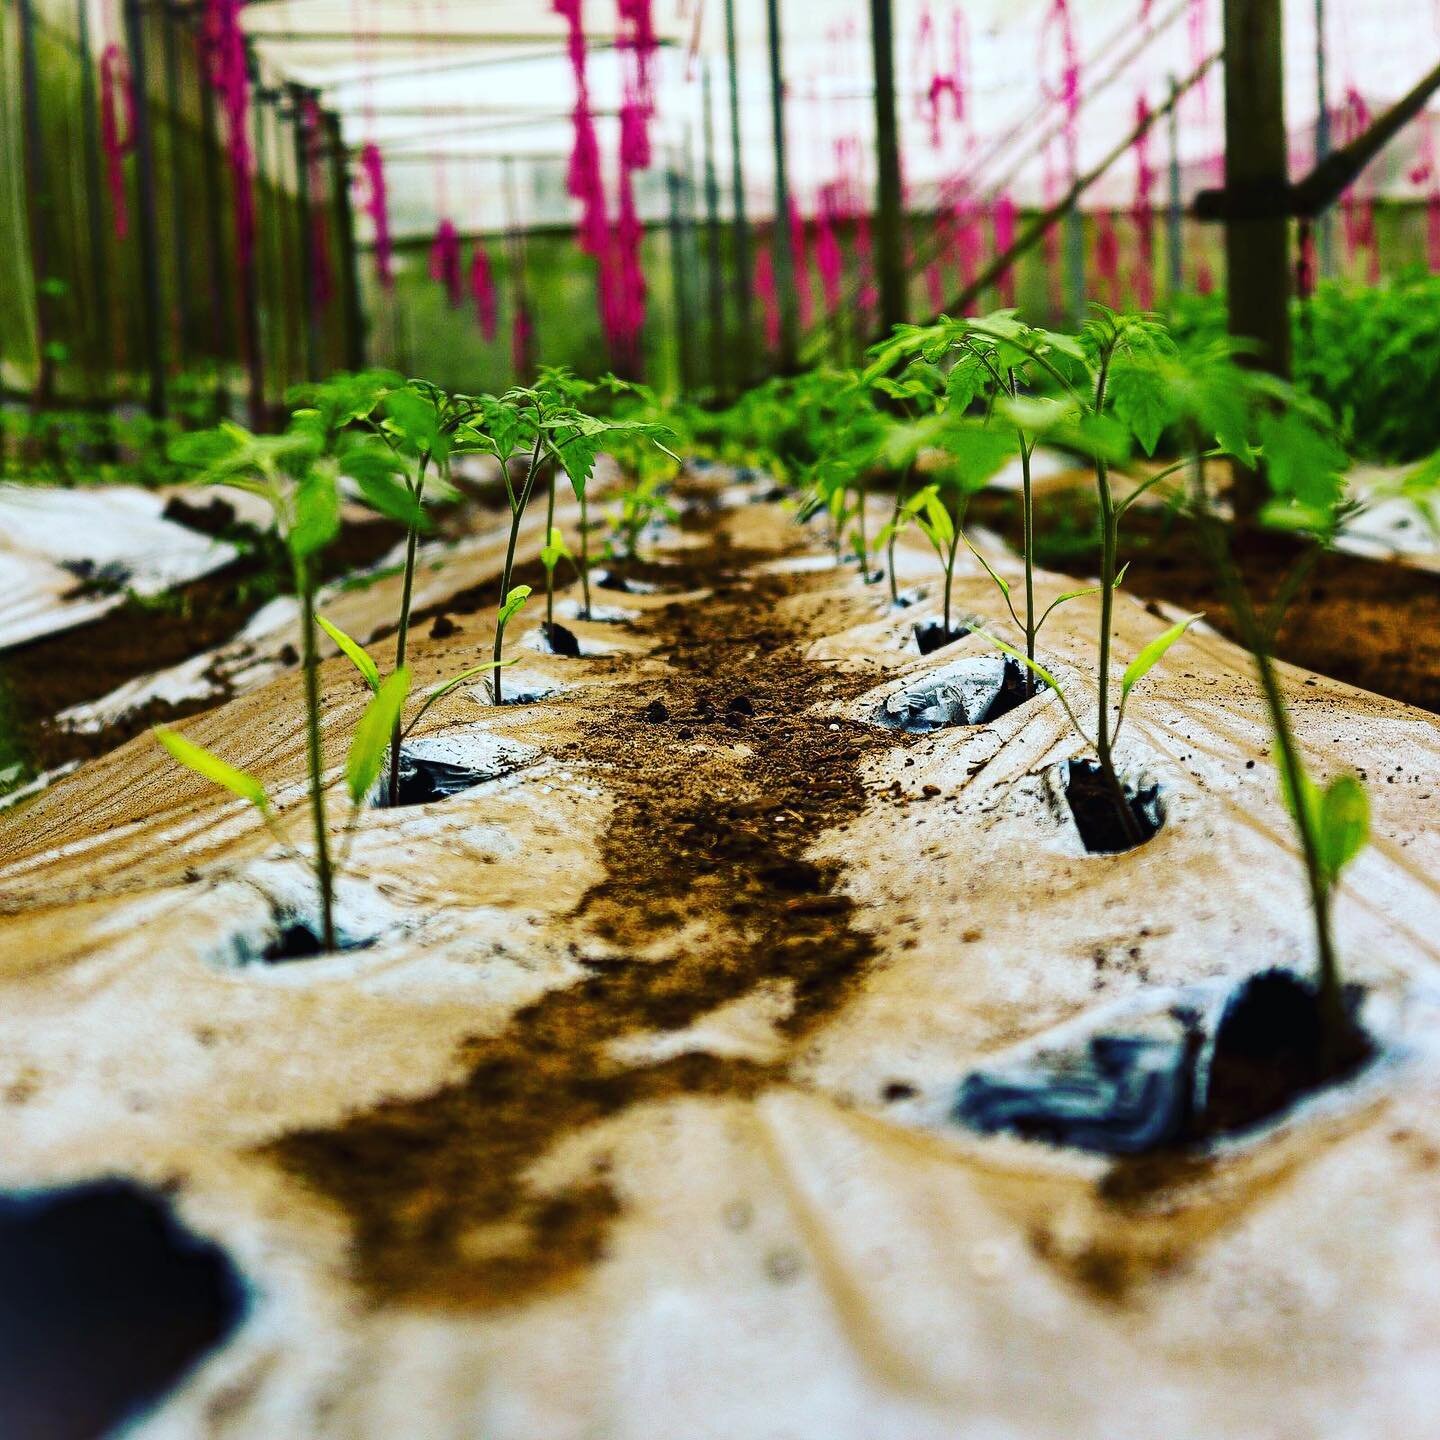 Another 3,000 truss and cherry tomato baby seedlings are in the ground. These precious things will see us with abundance of fresh juicy tomatoes throughout the winter. Preparation is essential! Have an awesome week everyone 🙃🙃🙃